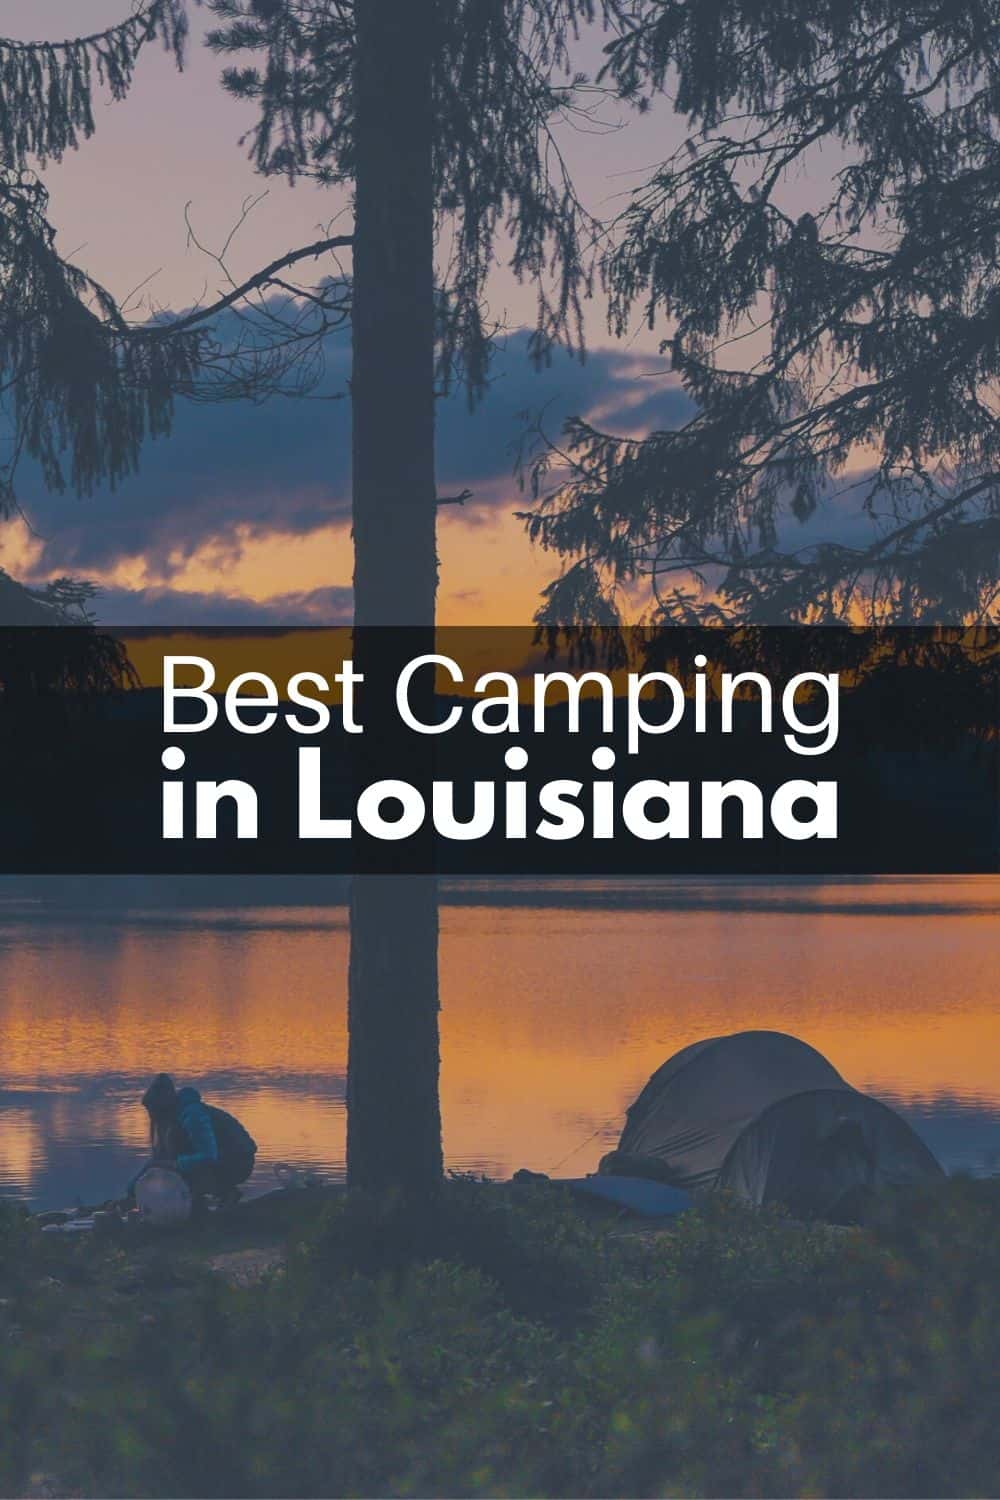 Best Camping Places To Check Out in Louisiana